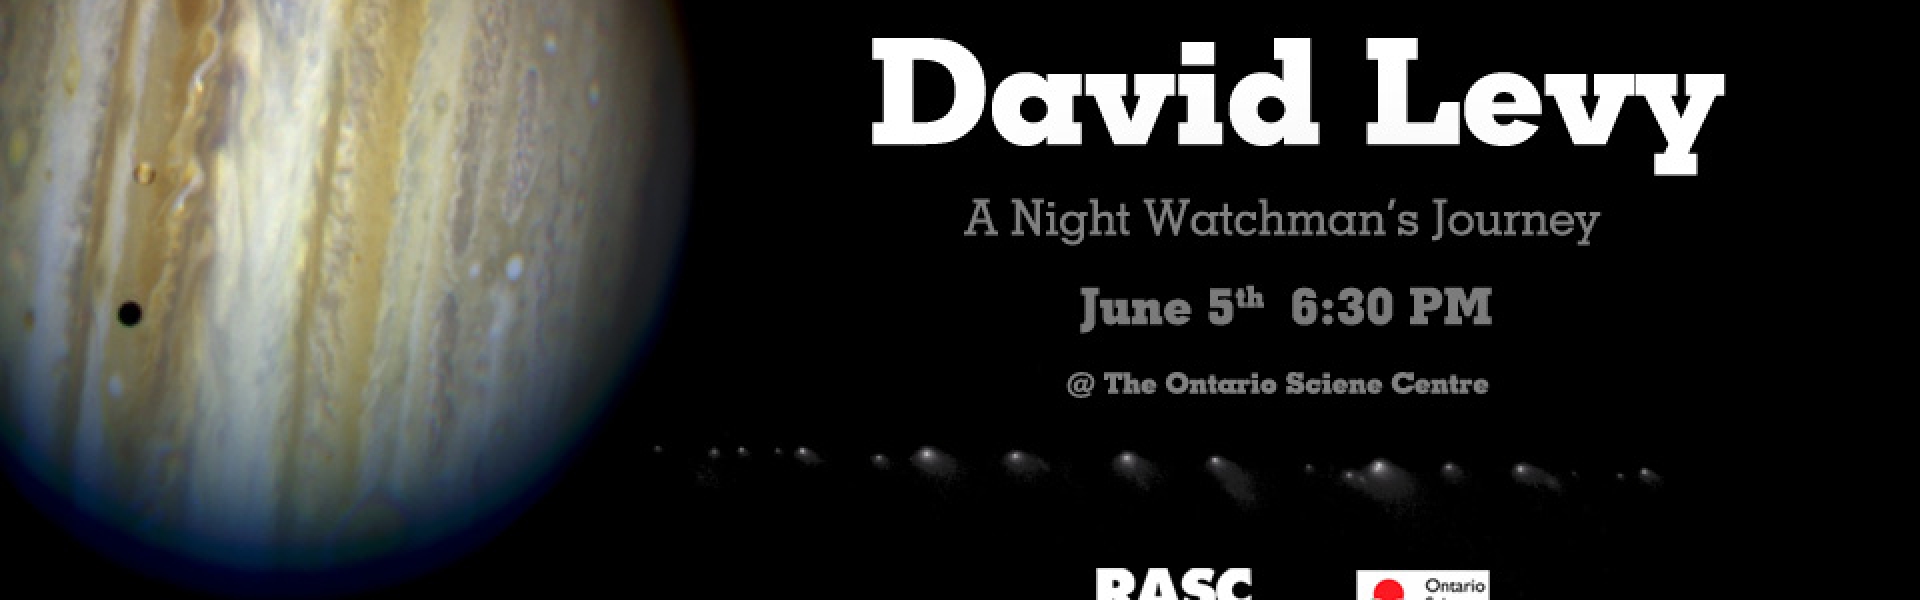 David Levy @ The Ontario Science Centre June 5, 6:30 pm